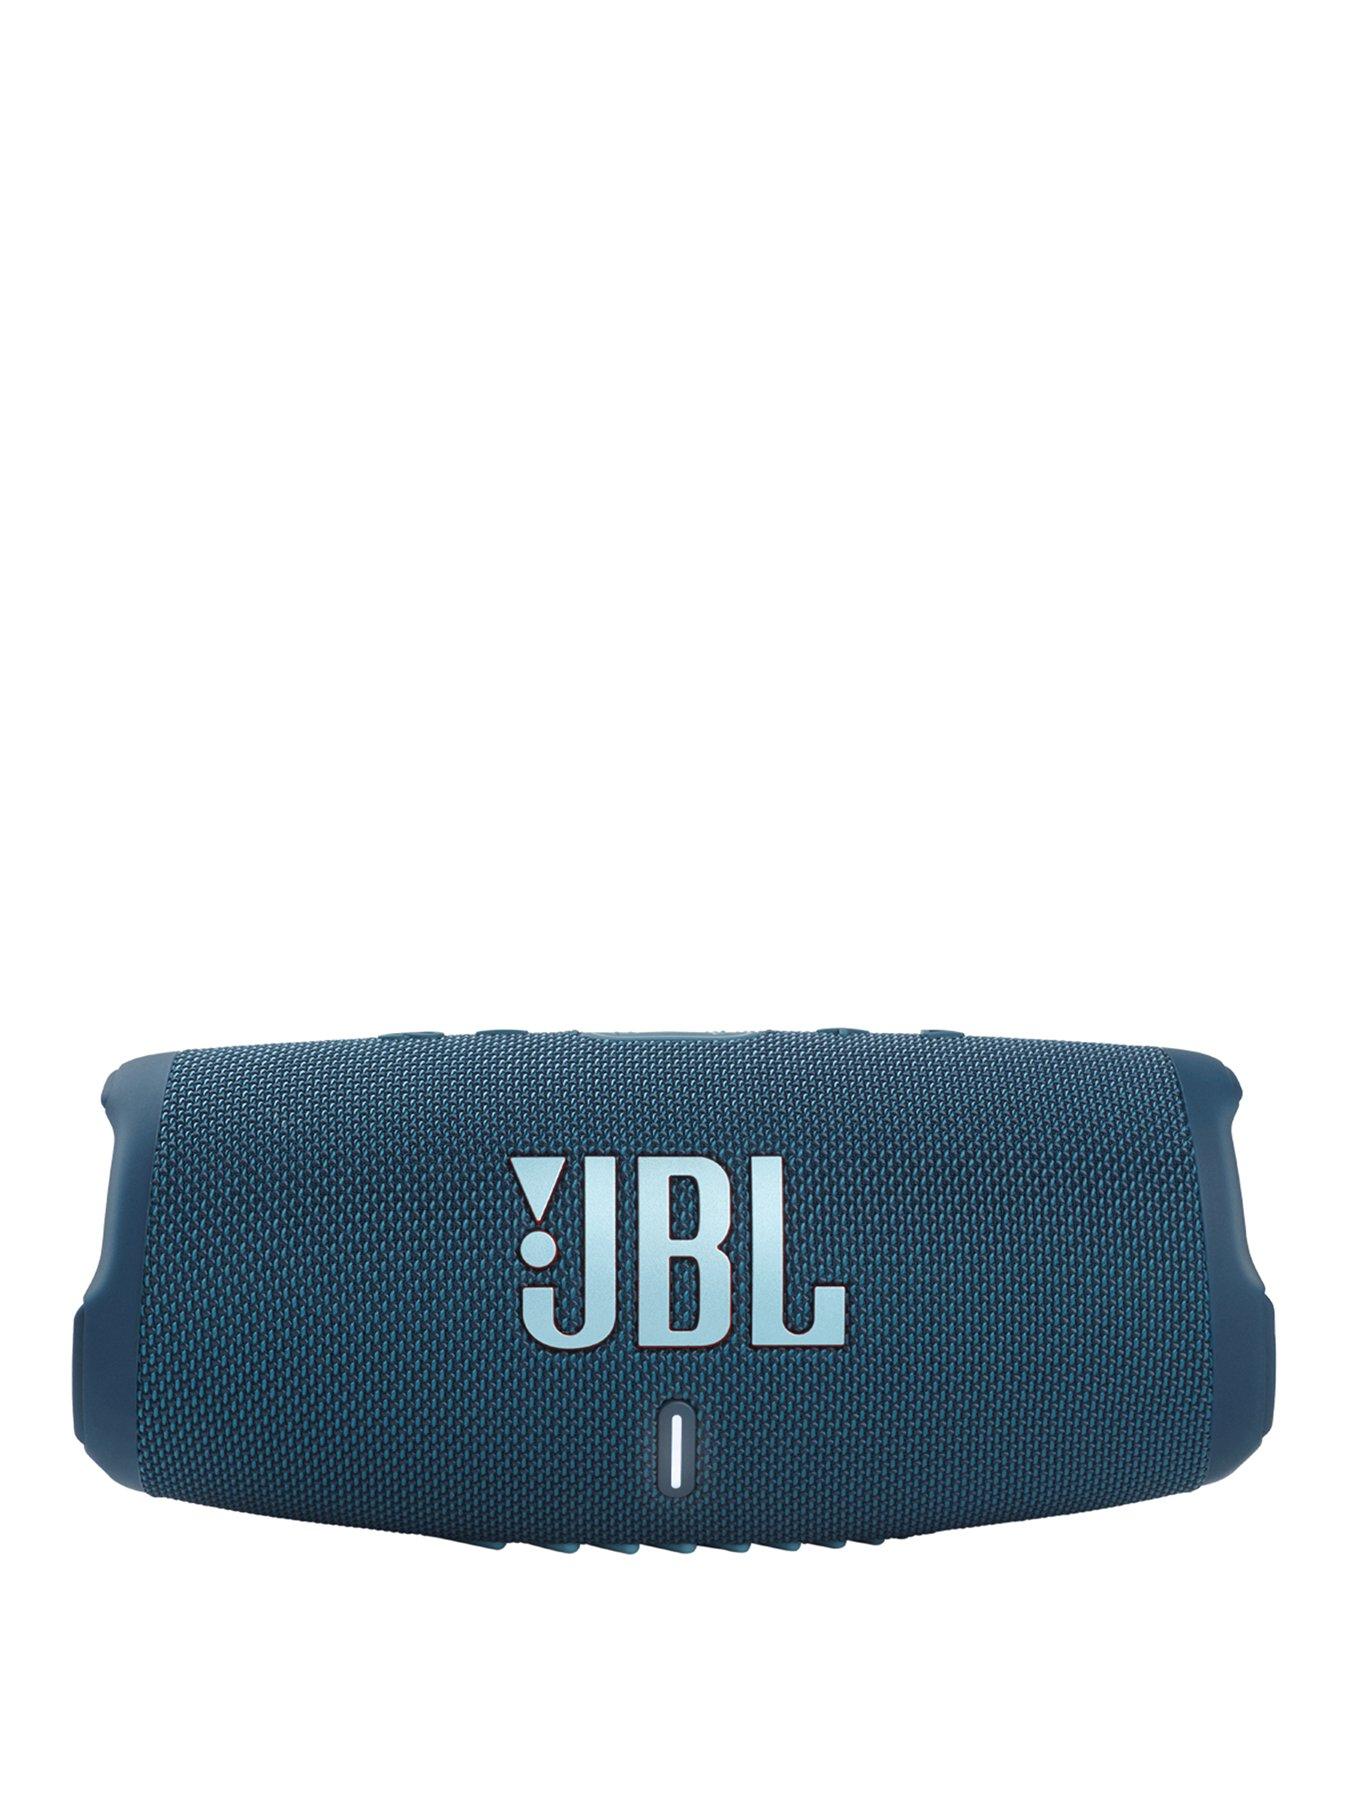 JBL Charge 5 Portable Speaker with WiFi and Bluetooth, built-in